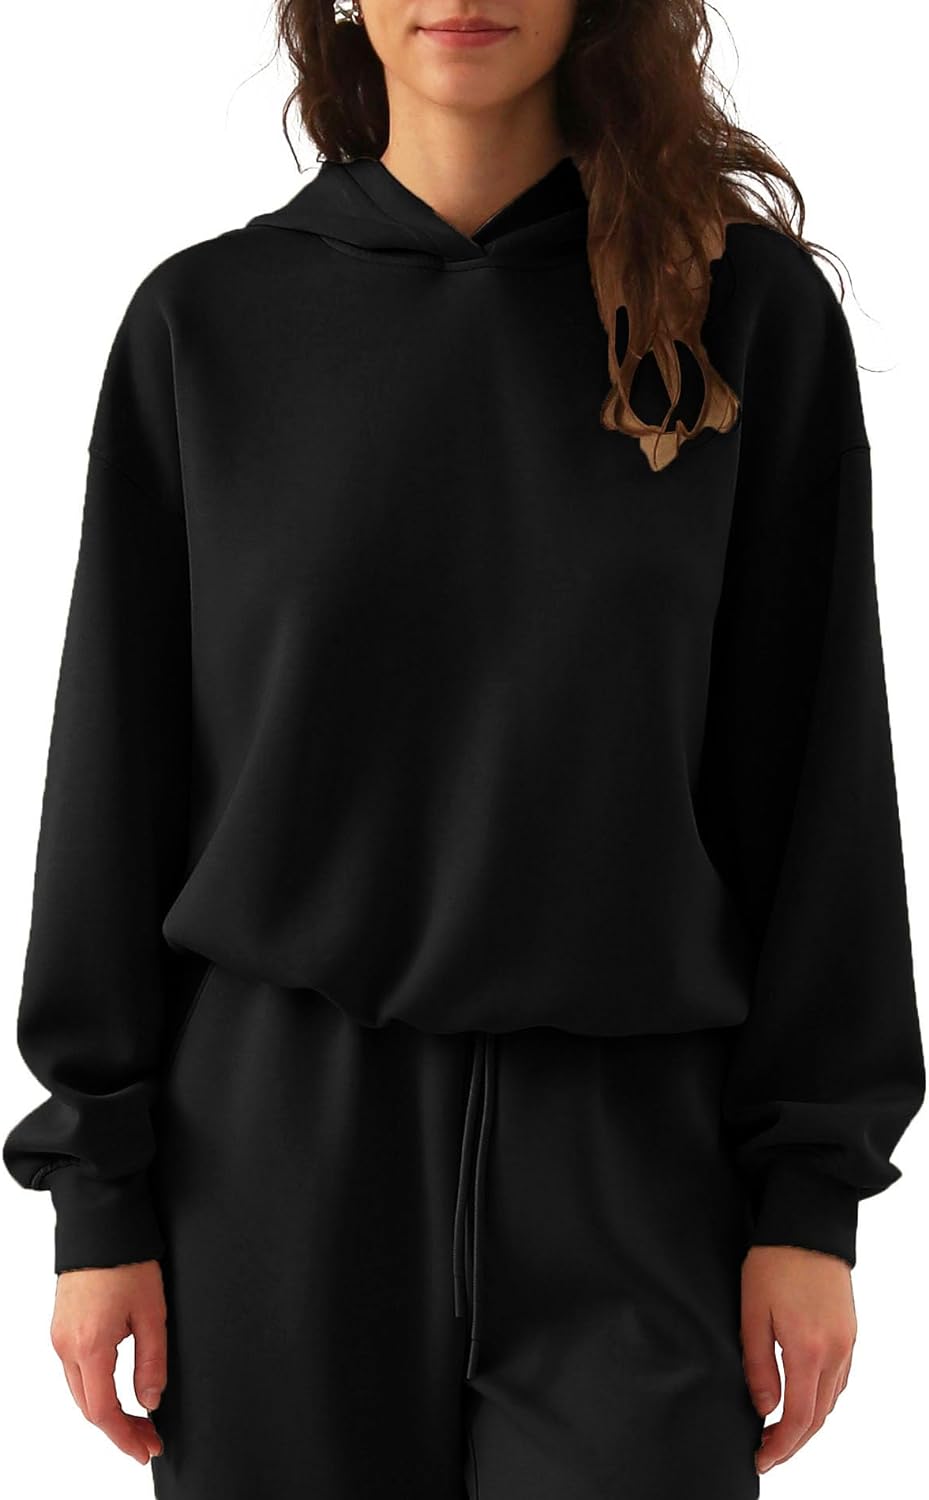 NTG Fad Black / X-Large Pullover Hoodies Long Dropped Sleeve Drawstring Casual